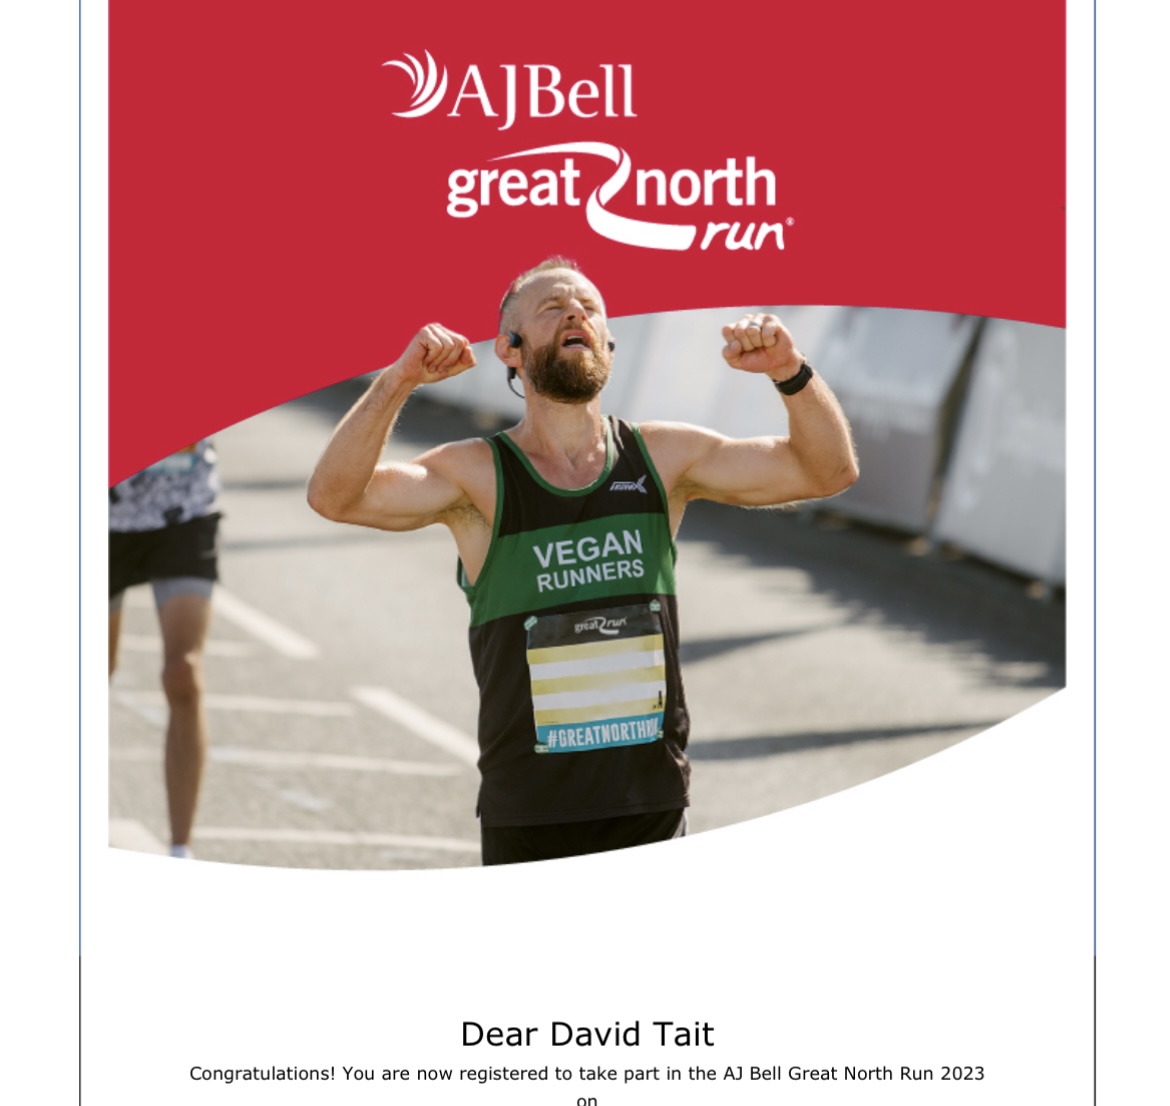 Right I’m in, running getting easier, let’s do this!!

Fundraising page to follow soon, running in aid of @CombatStress 
#veteransmentalhealth #GreatNorthRun 🏃‍♂️🏃‍♂️